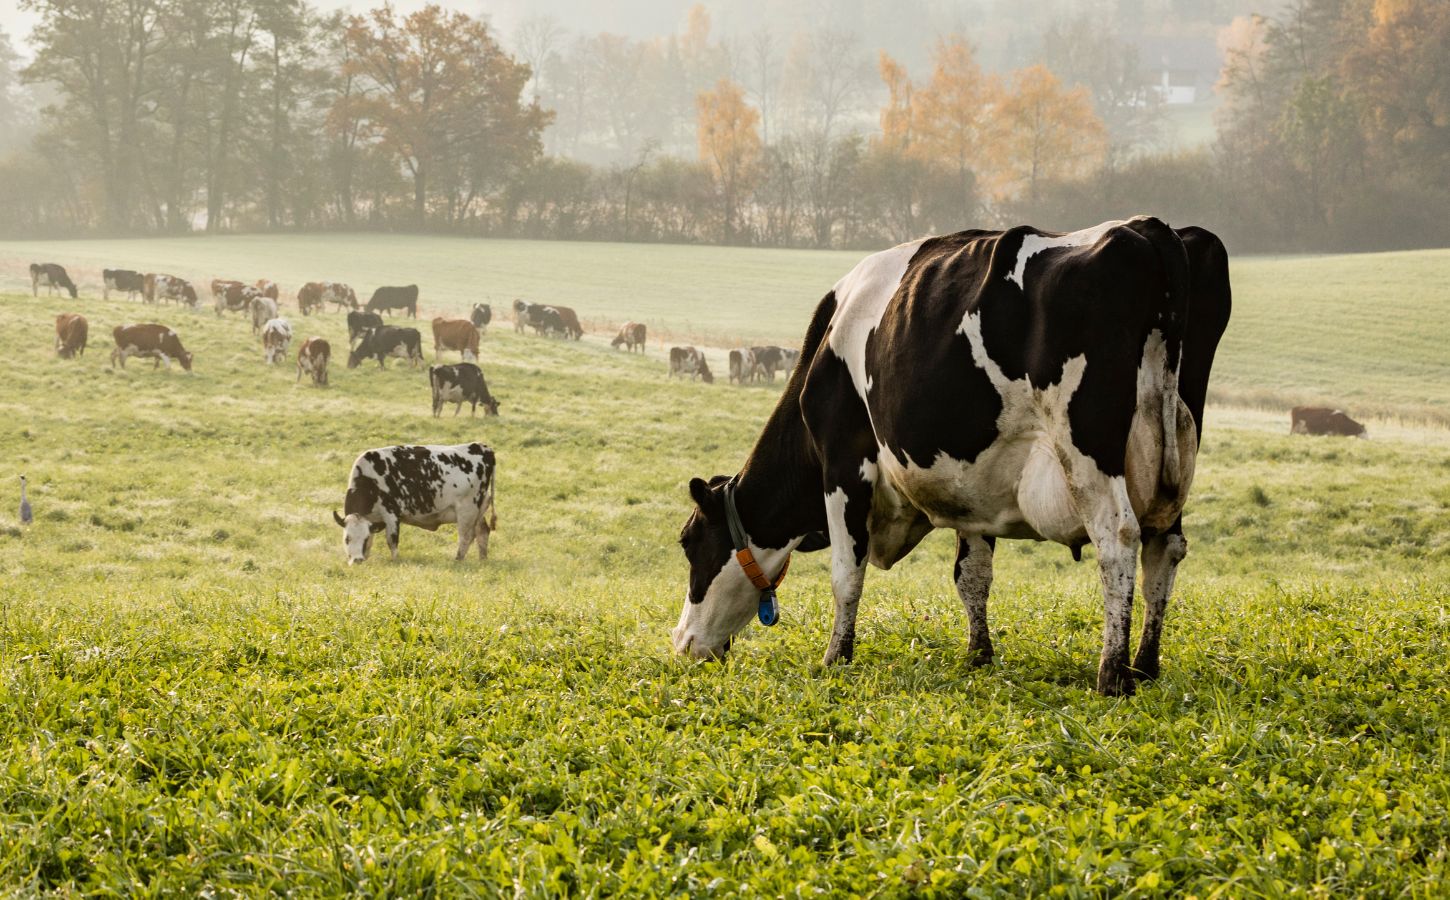 A cow grazing on a field in Switzerland, a country where meat consumption is high